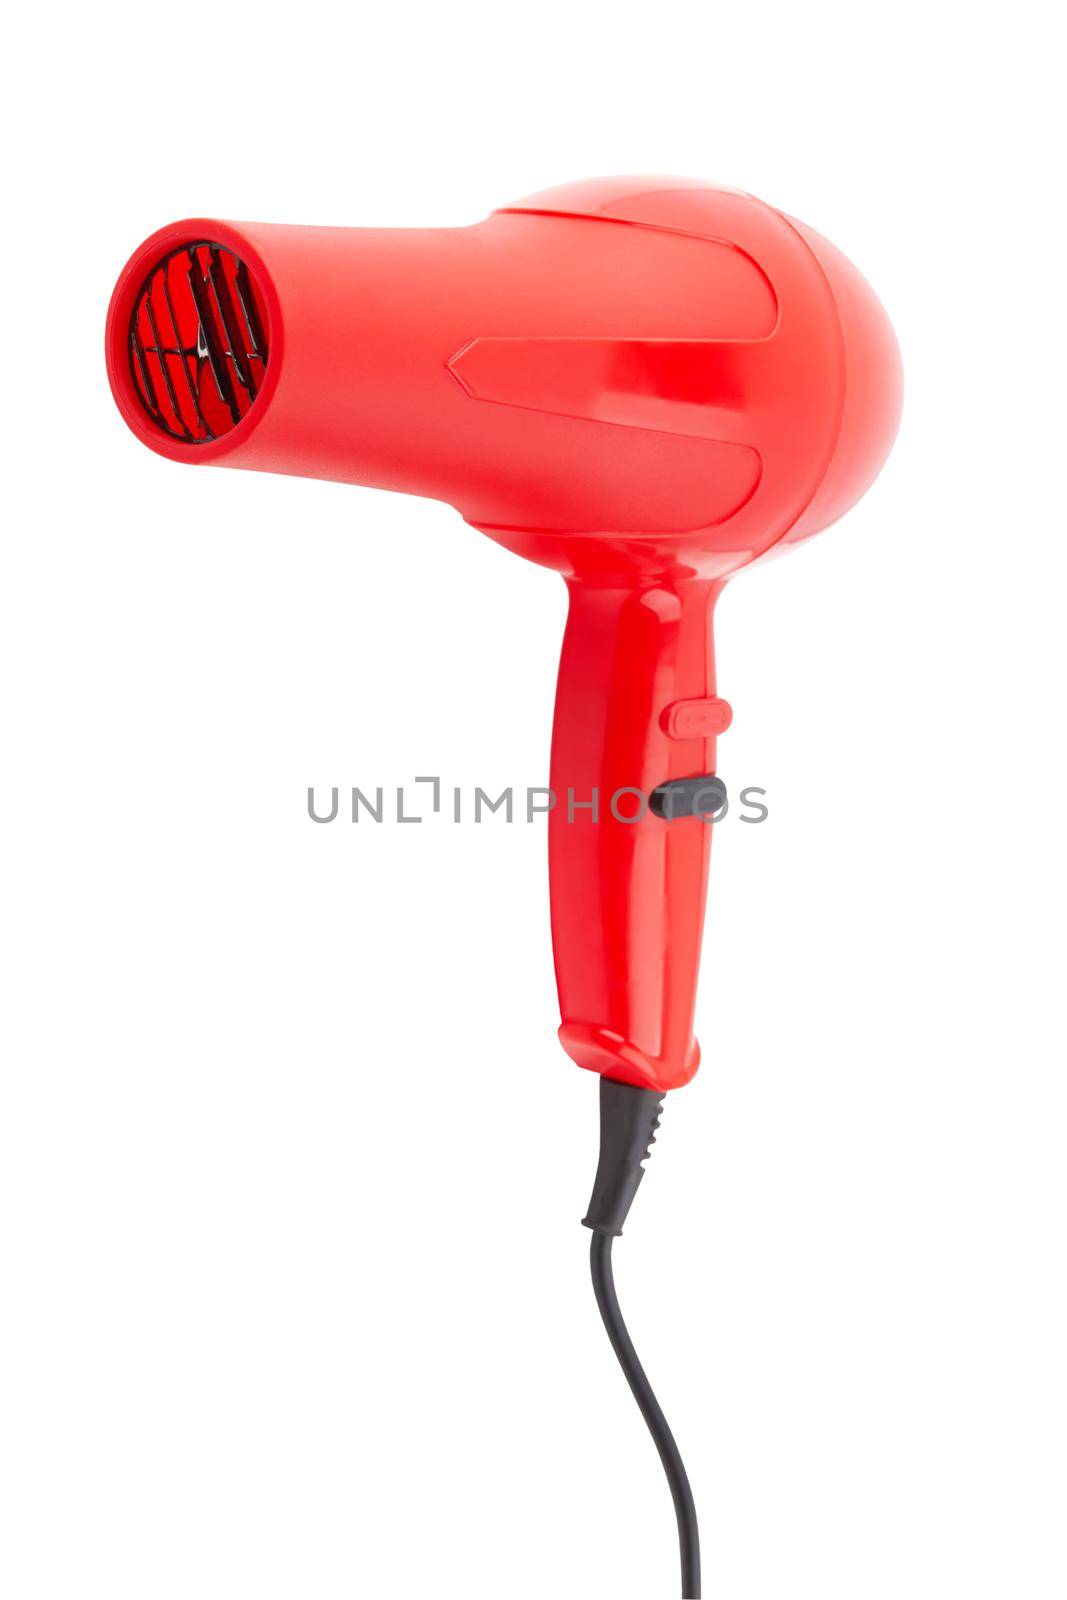 Red hair dryer isolated on a white background